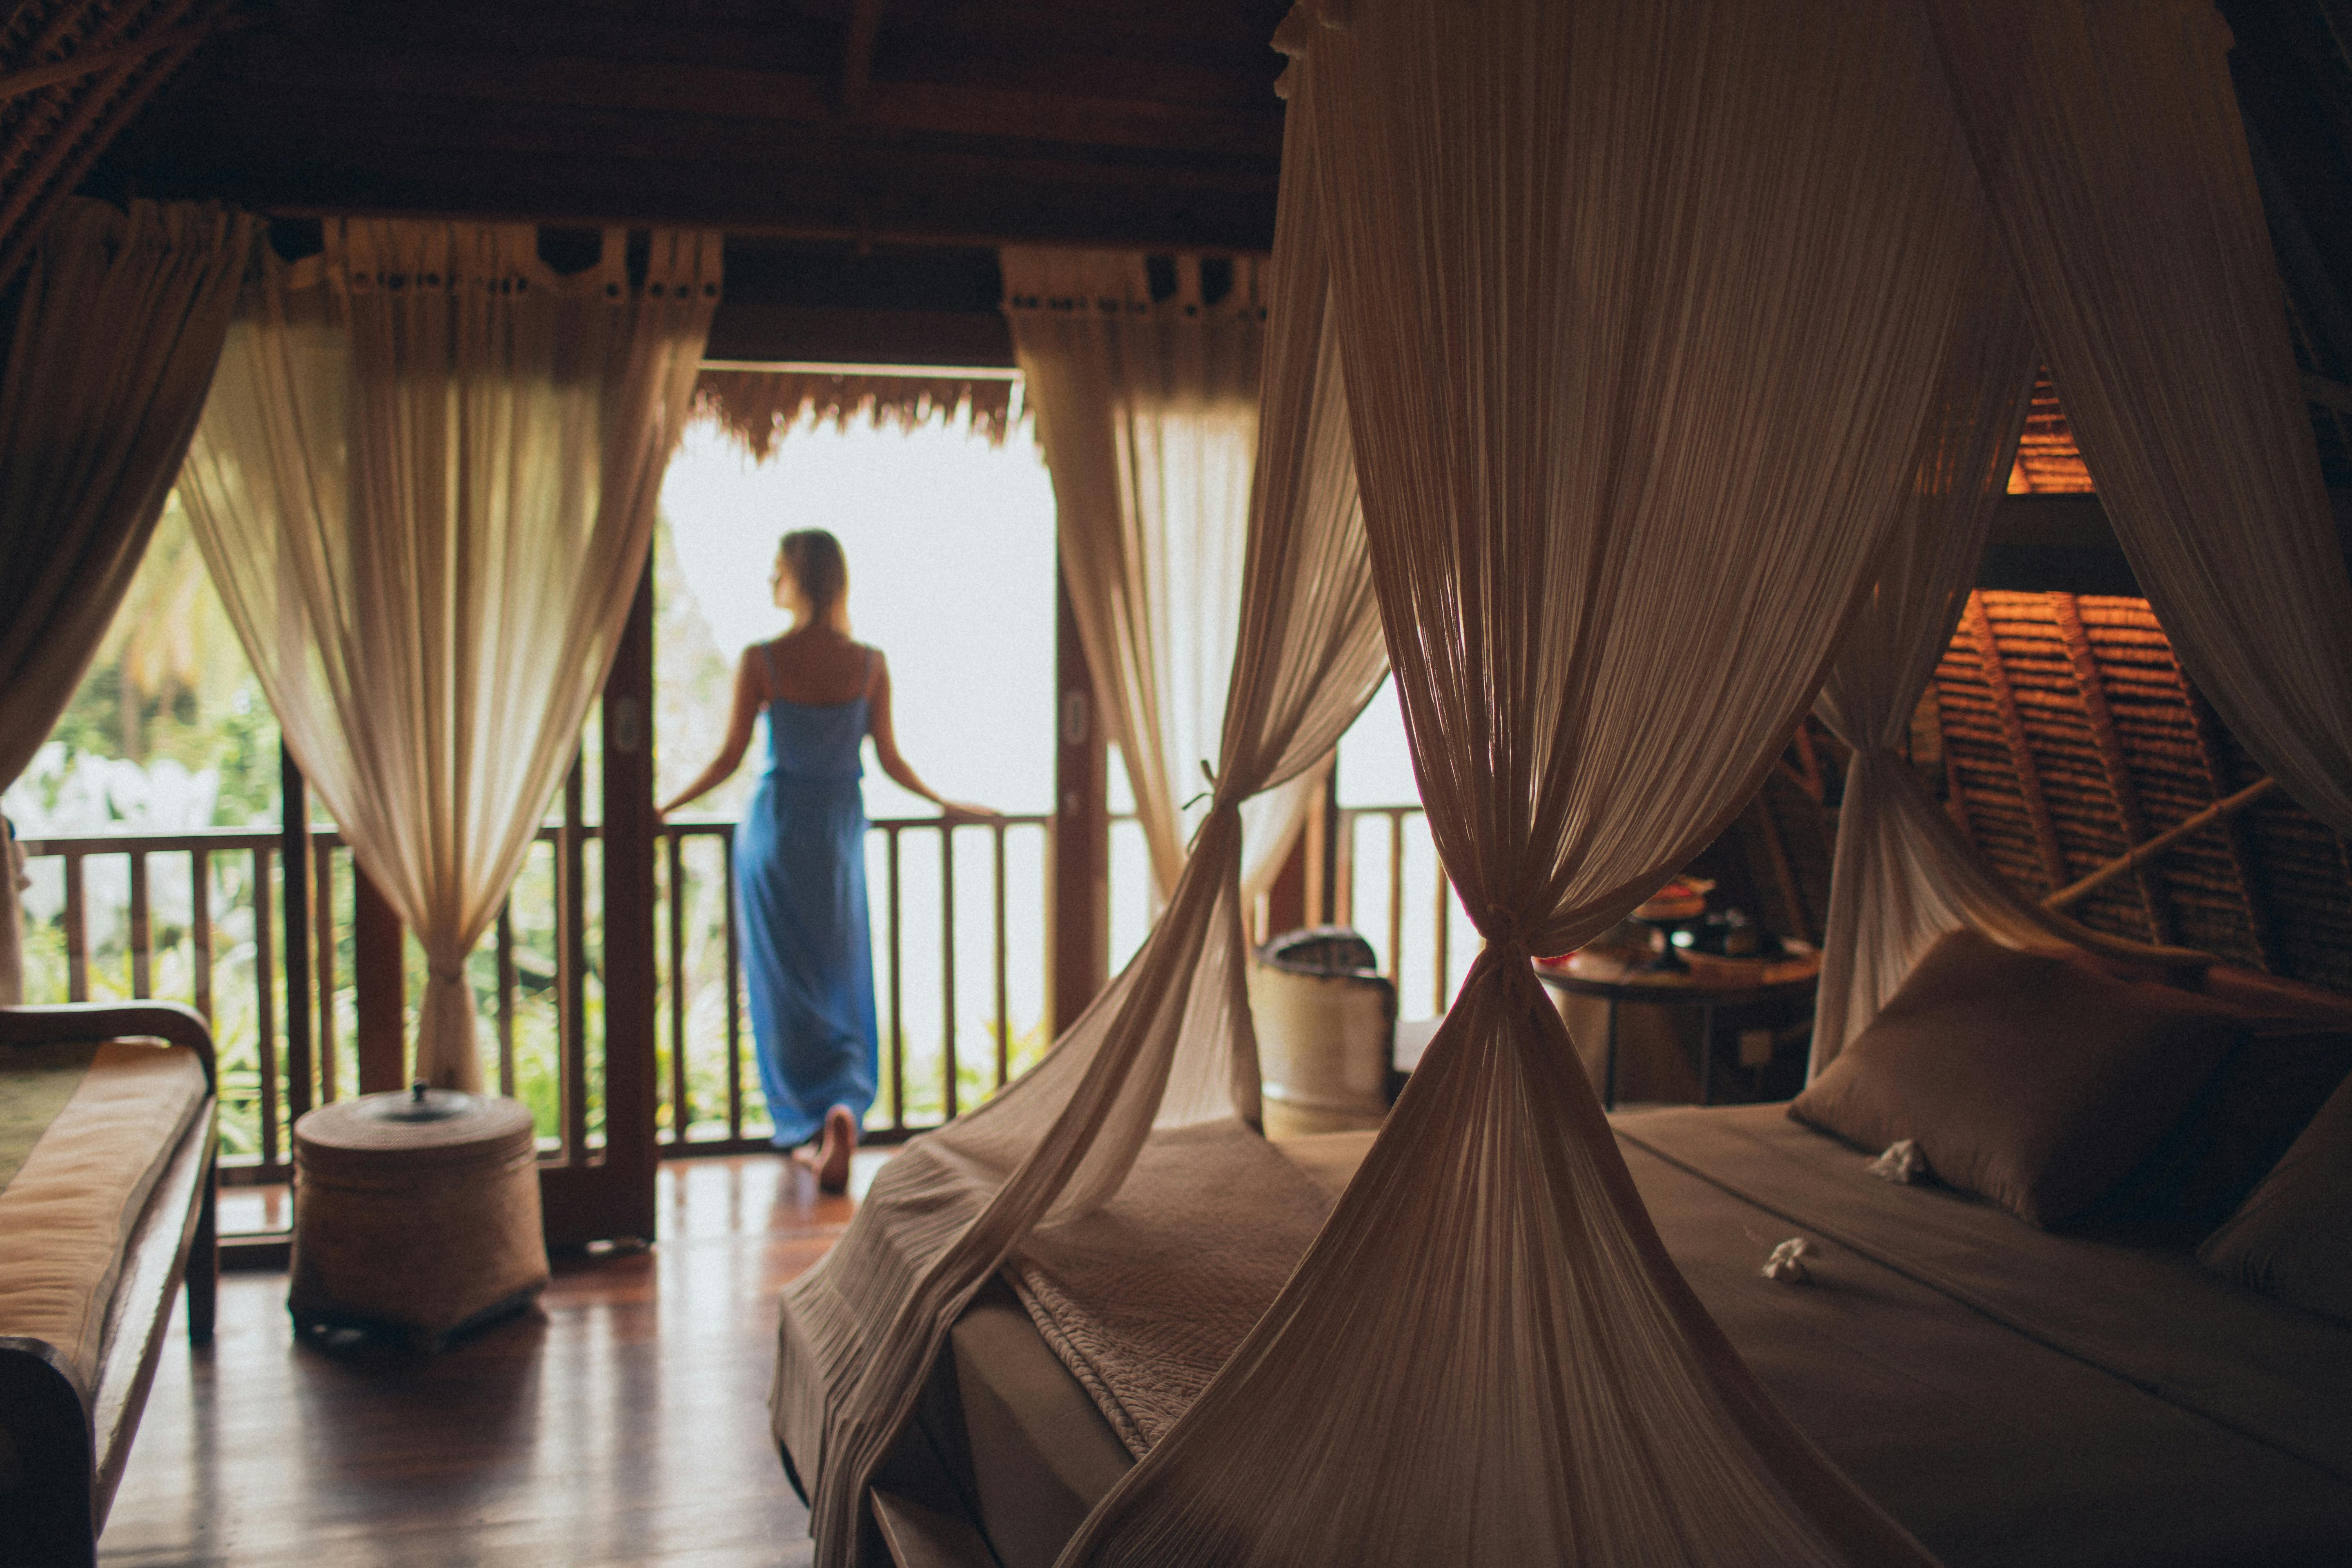 Woman leaning on handrail in a hotel room | Source: Pexels